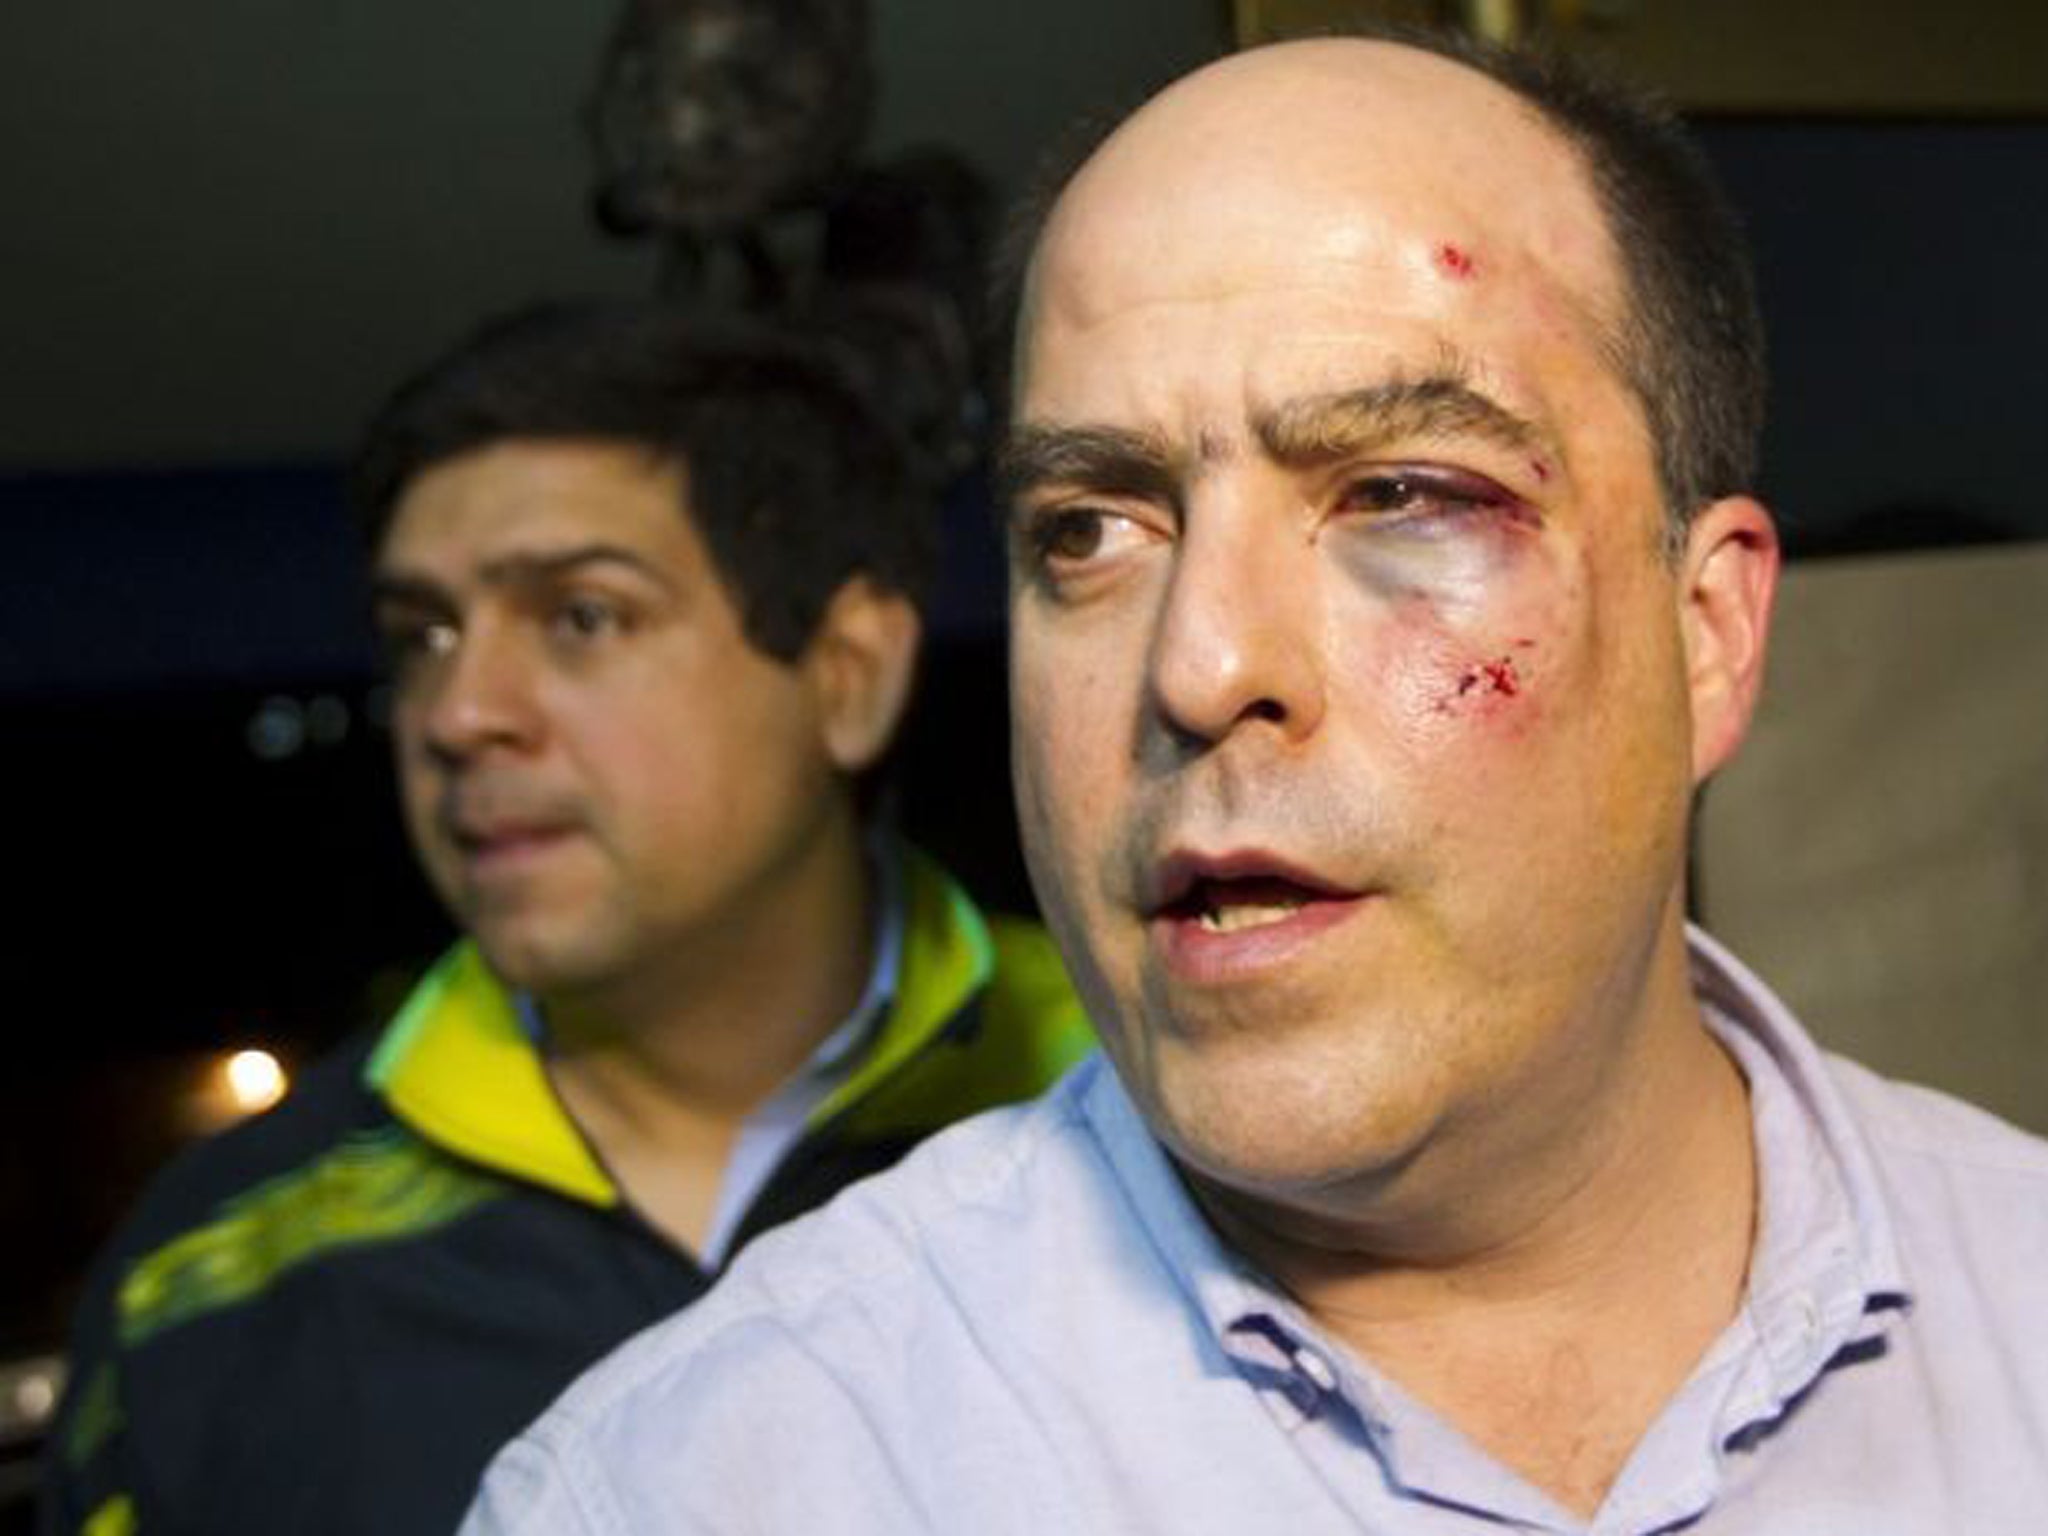 Venezuelan opposition politician Julio Borges of the Primero Justicia party was left cut and bruised after the brawl